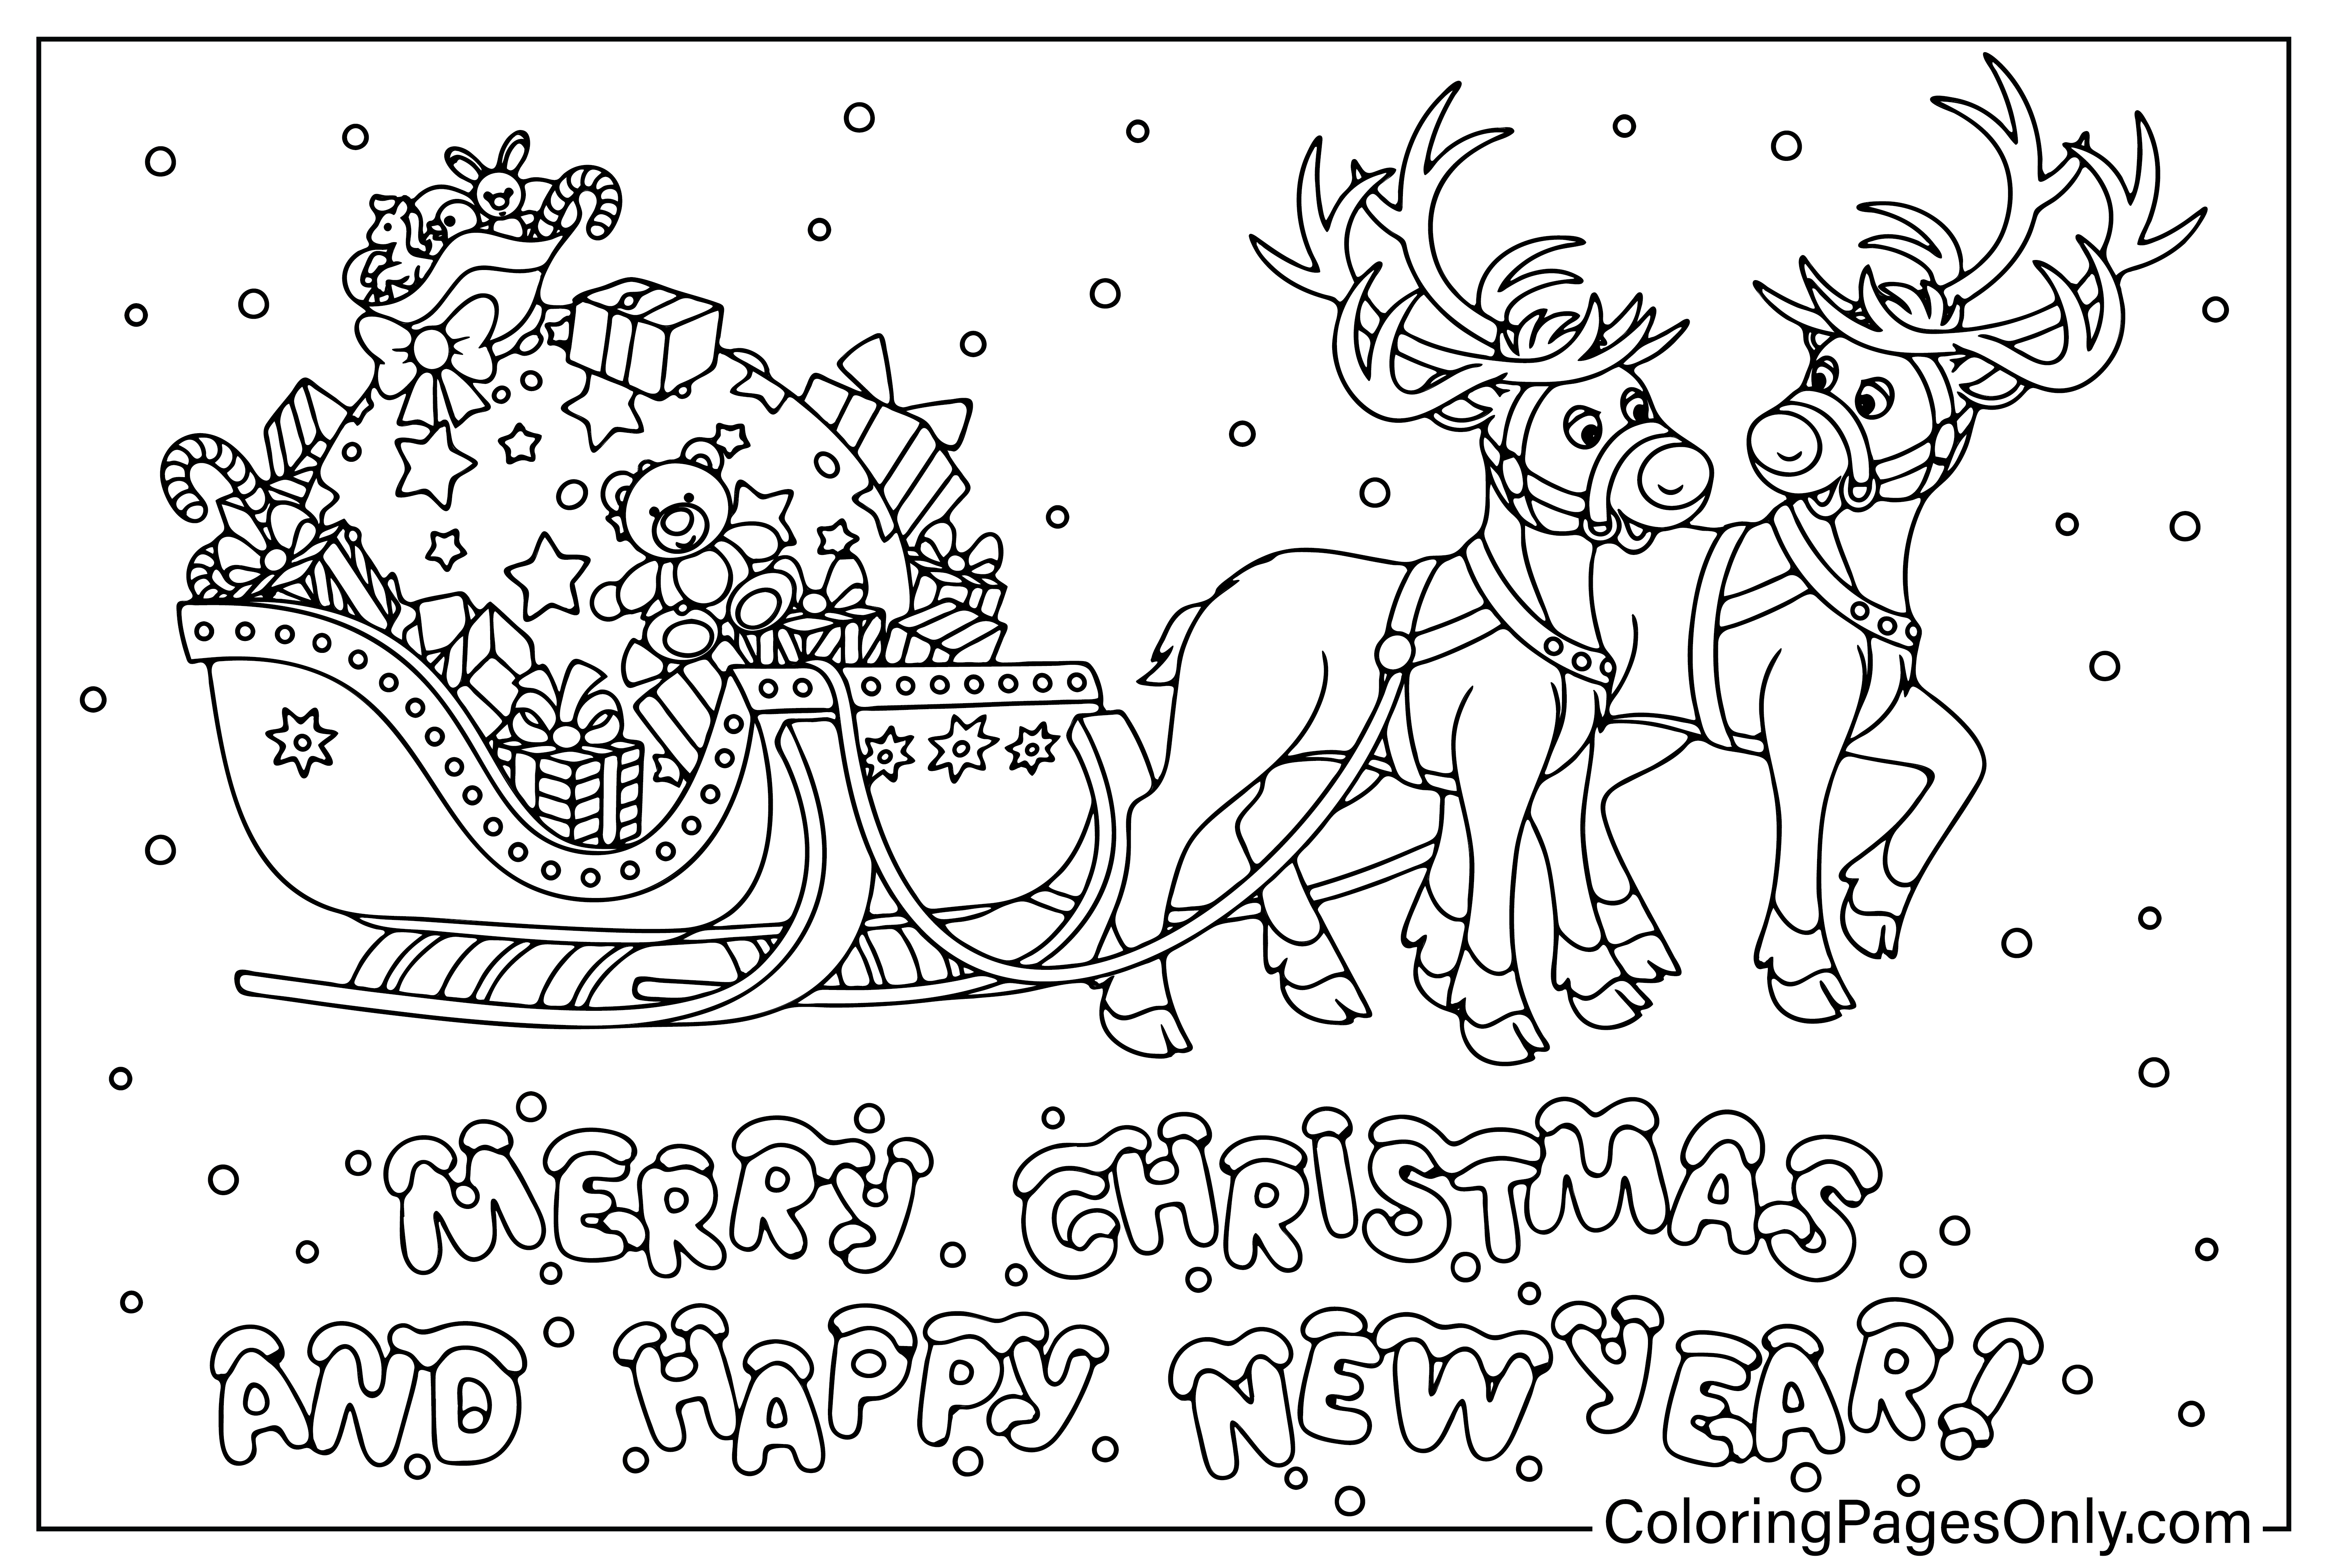 Santa Claus and Reindeer Coloring Page